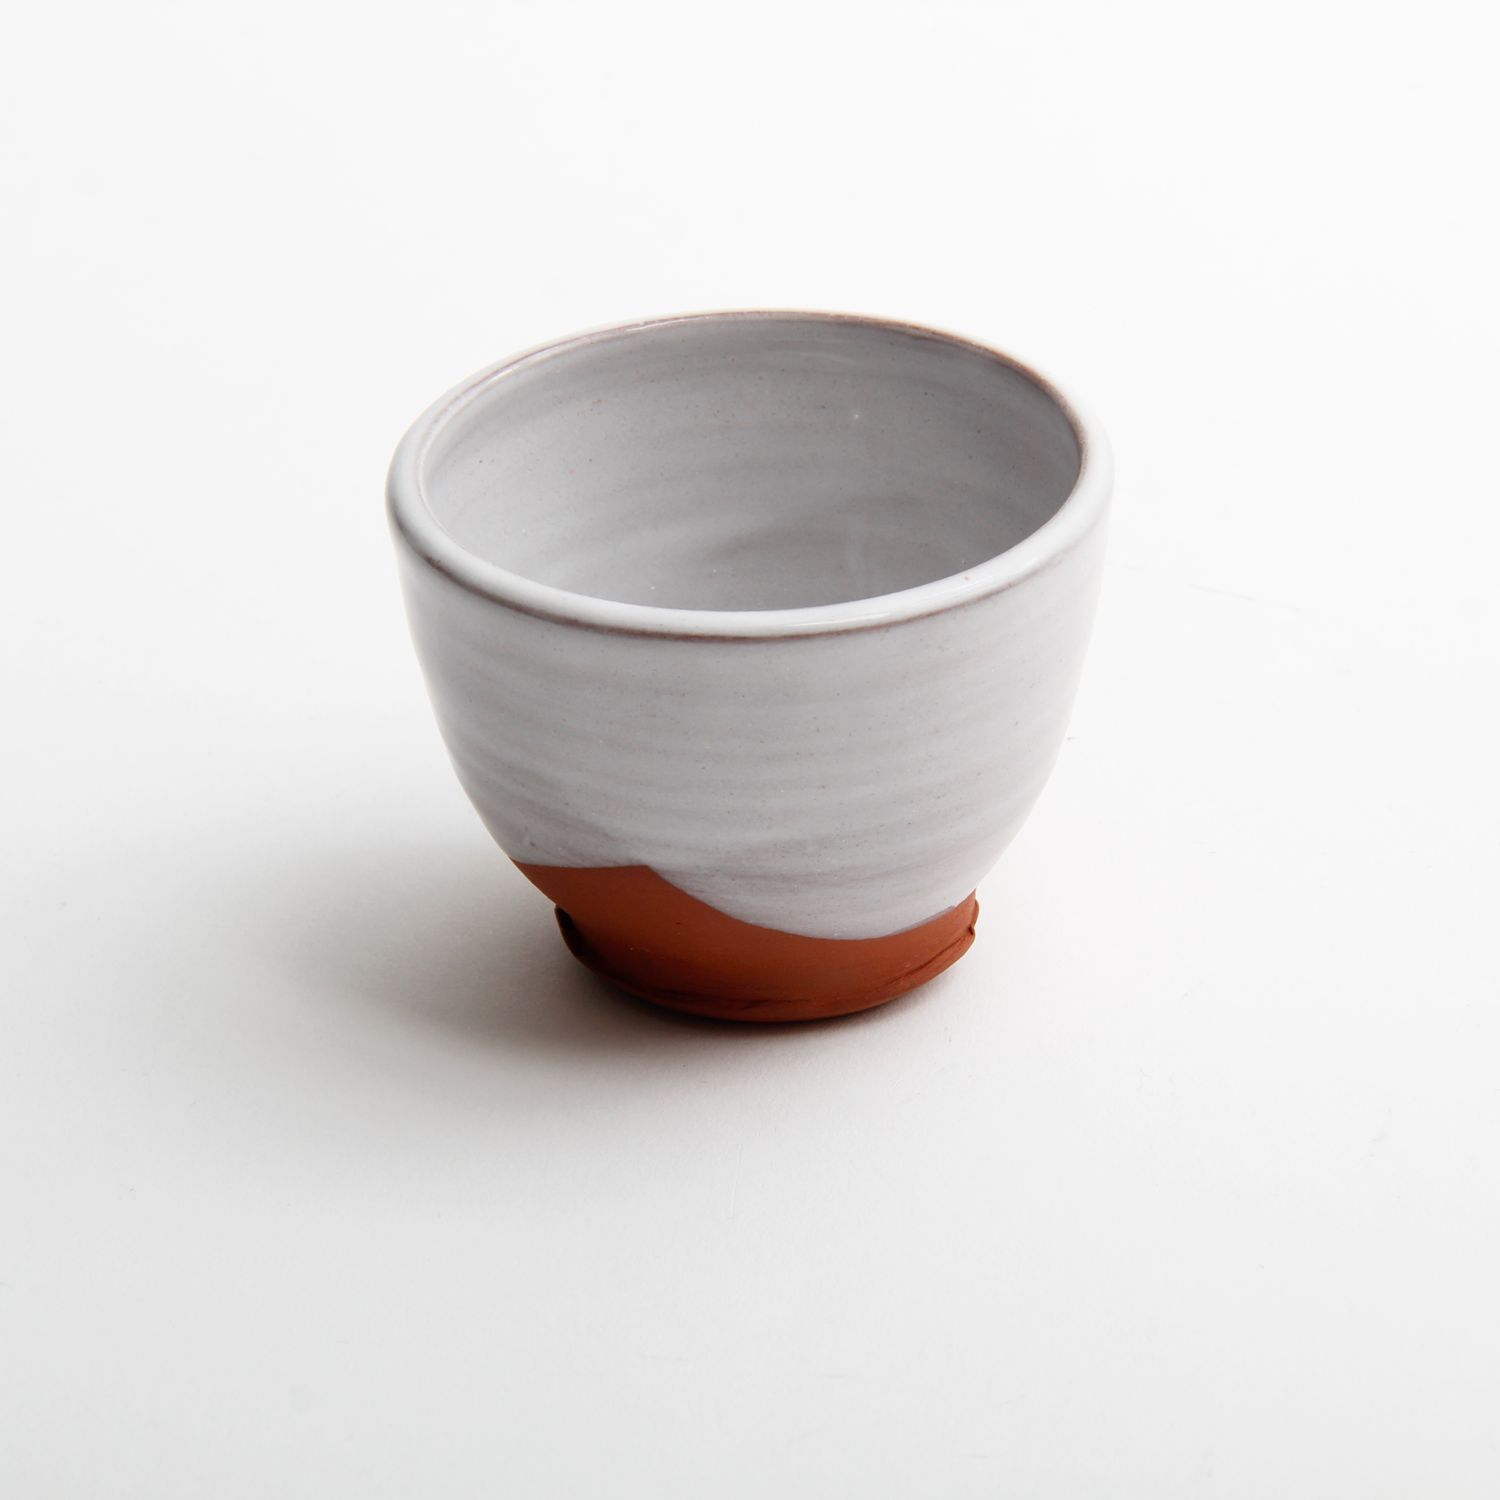 Mary McKenzie: Small Dip Bowl White Product Image 2 of 2